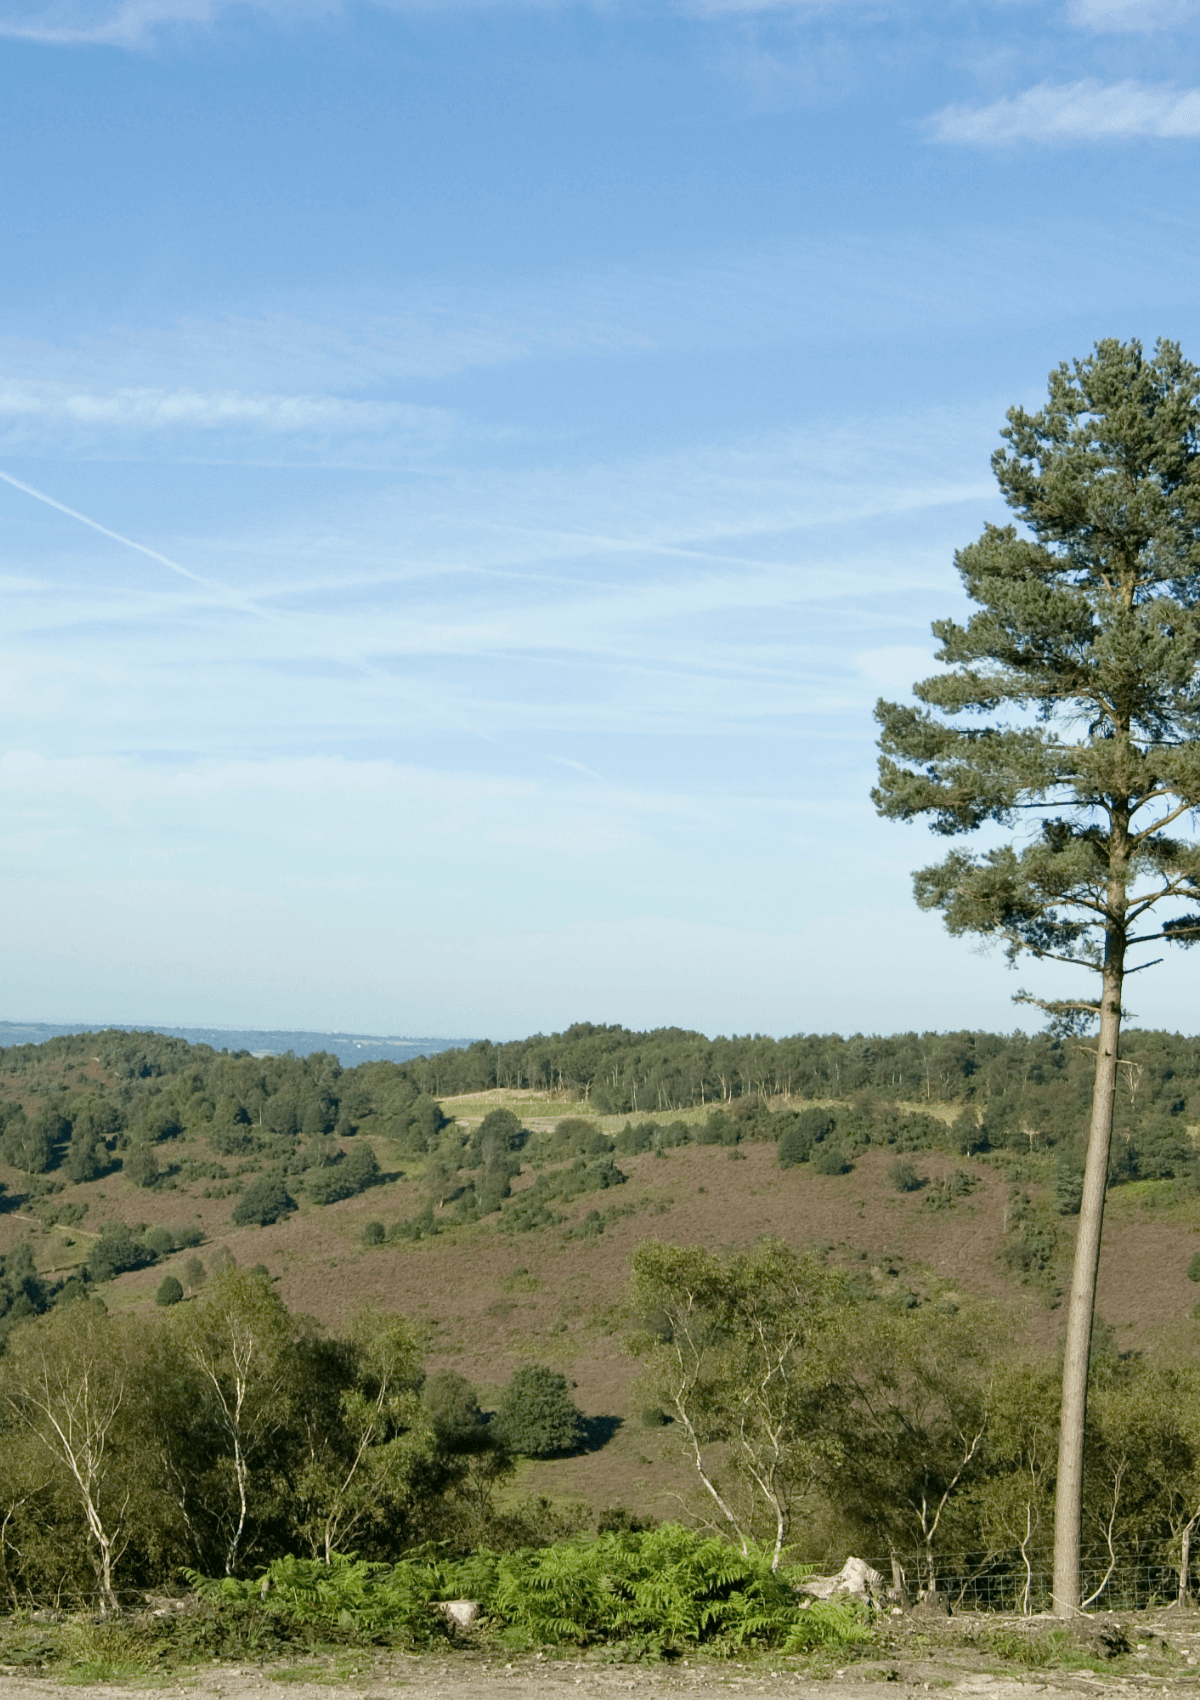 Devil's Punchbowl on the Hidden Hindhead Trail, Surrey, England